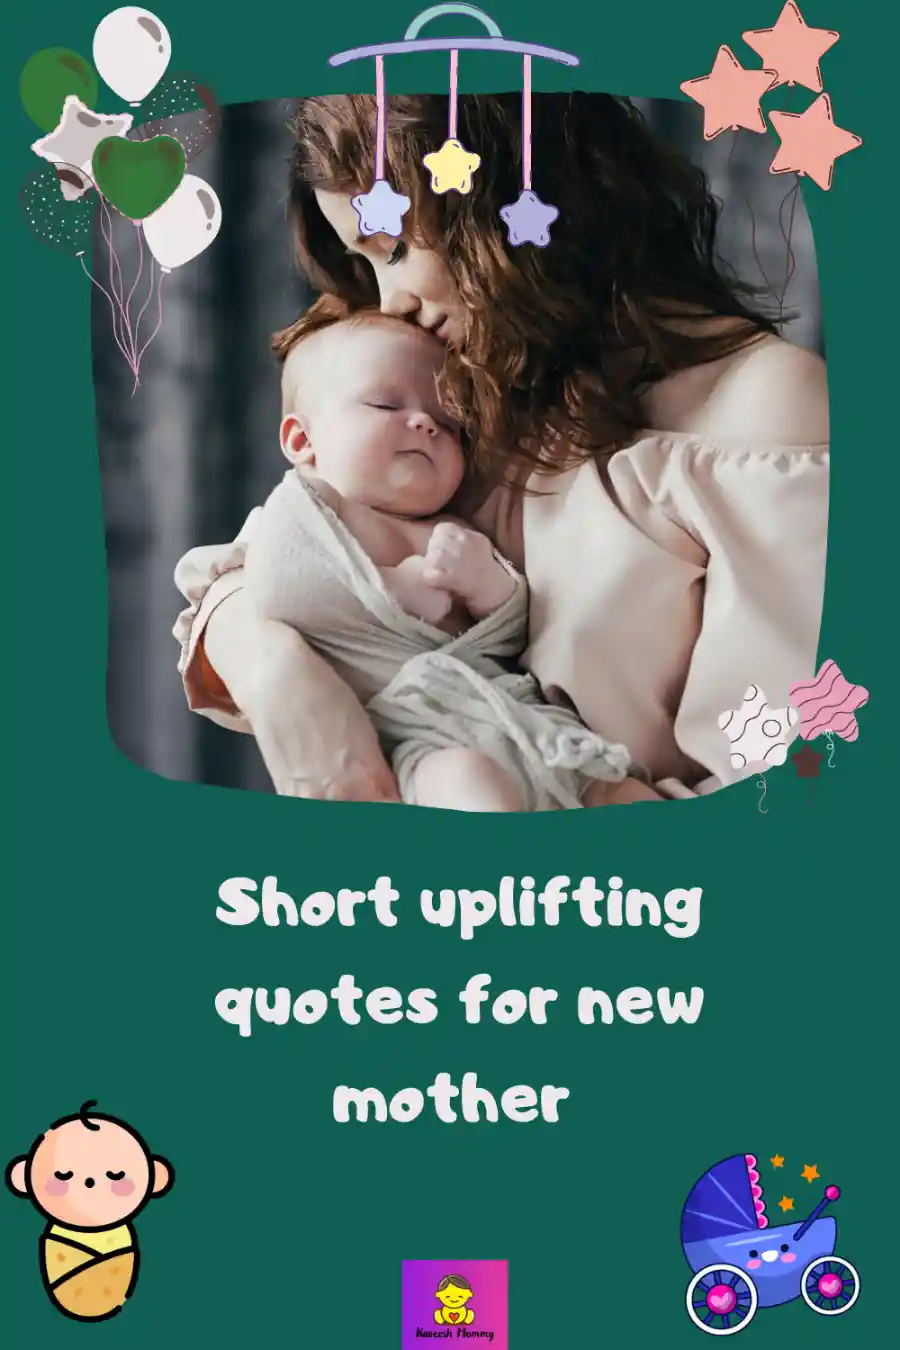 Short-uplifting-quotes-for-new-mother-